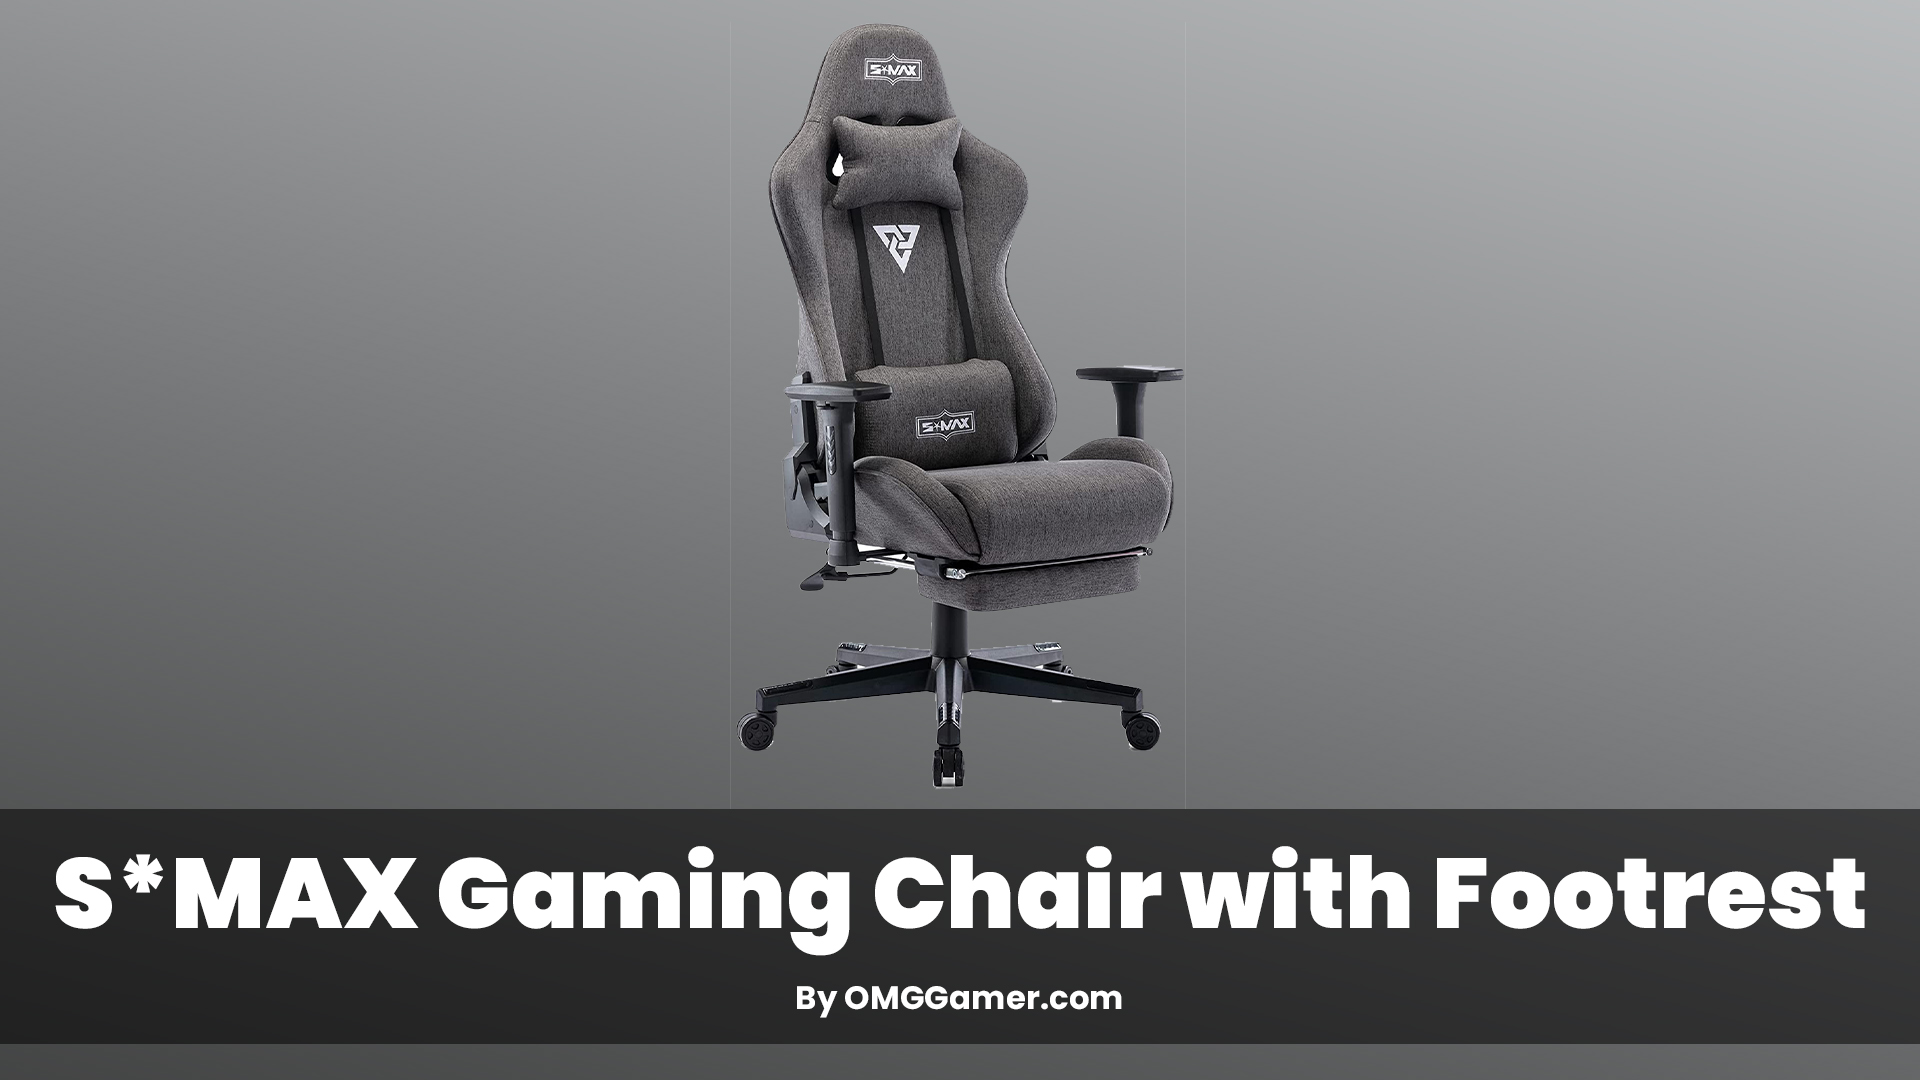 S*MAX Gaming Chair with Footrest